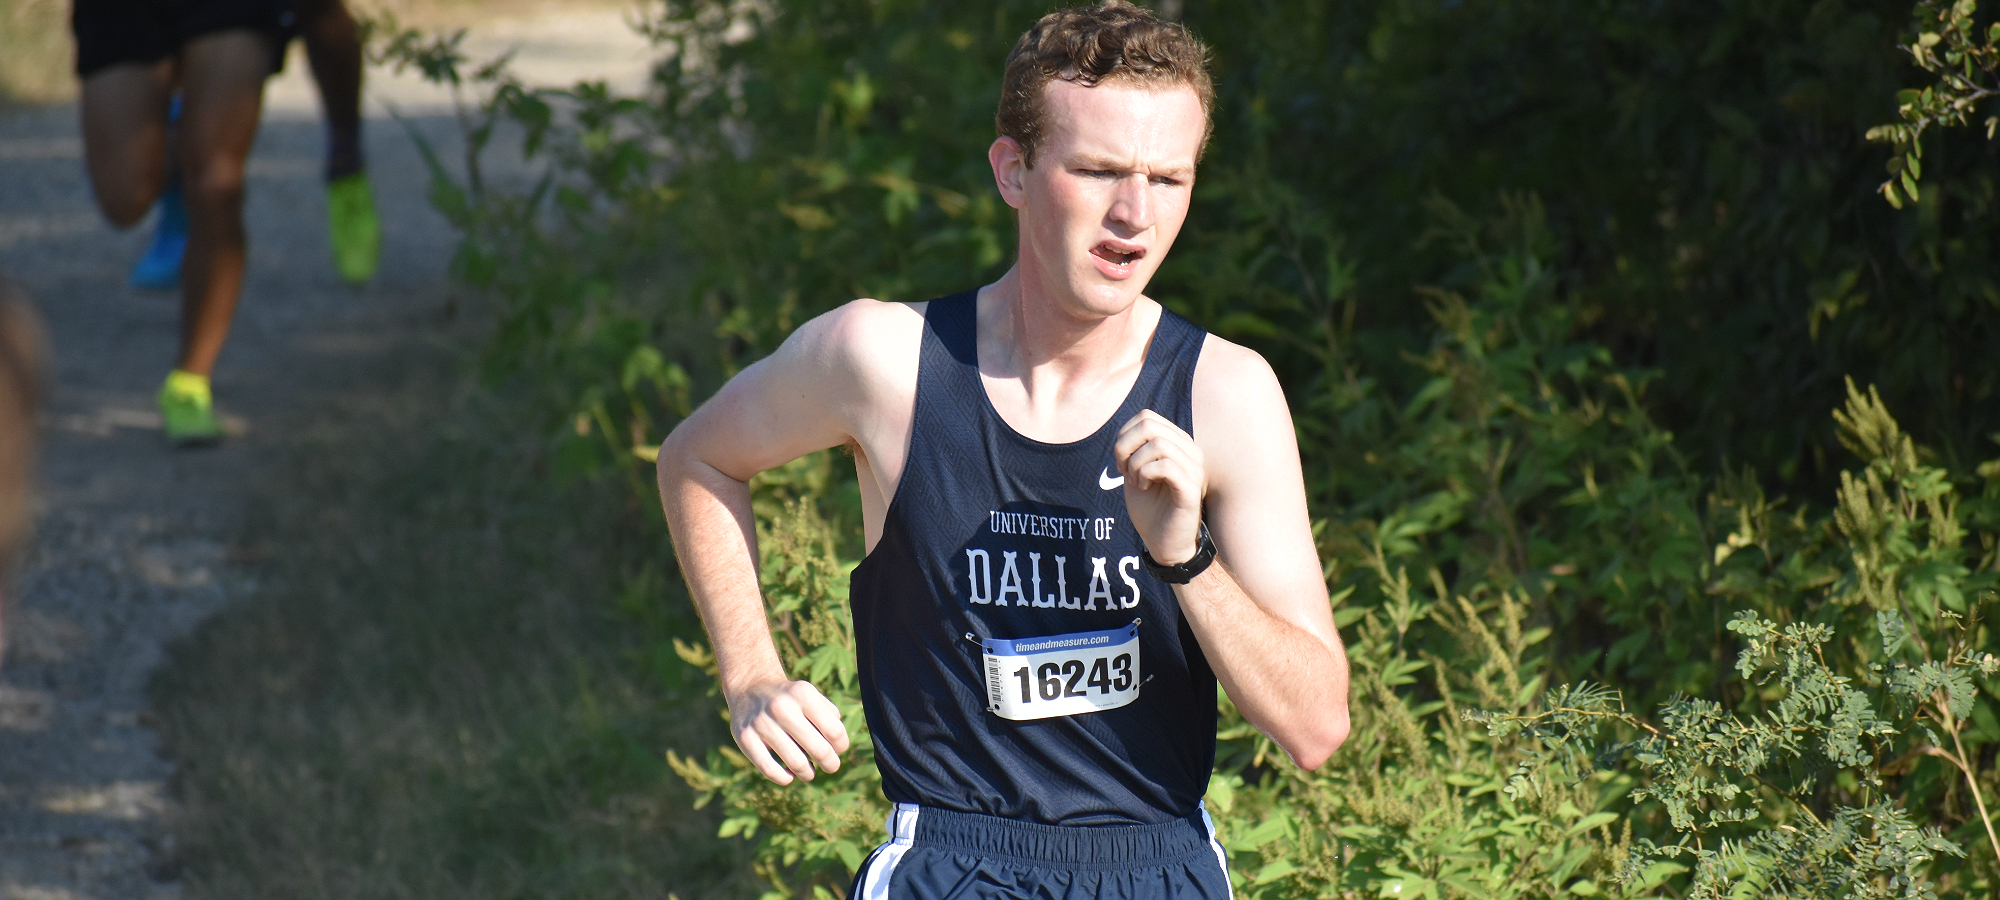 Boyle was one of several Crusaders to set their fastest 8k time on the season.